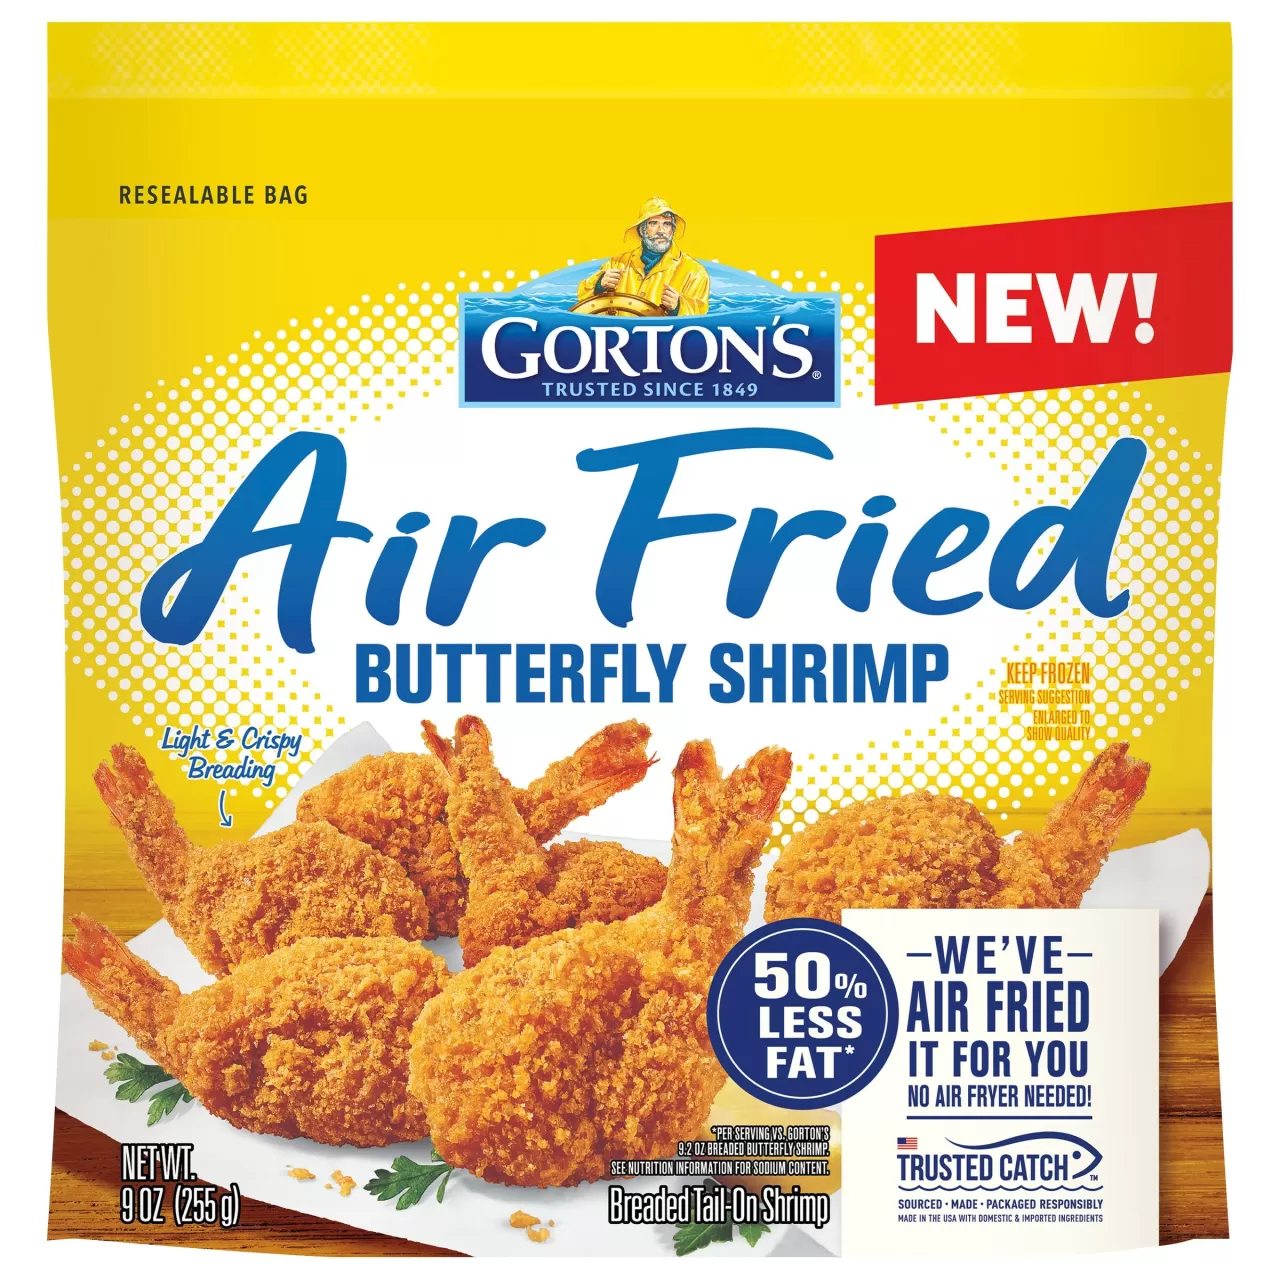 Made with tender butterfly shrimp and a light & crispy breading that won't weigh you down, as it's air fried with hot air, not oil. img#1